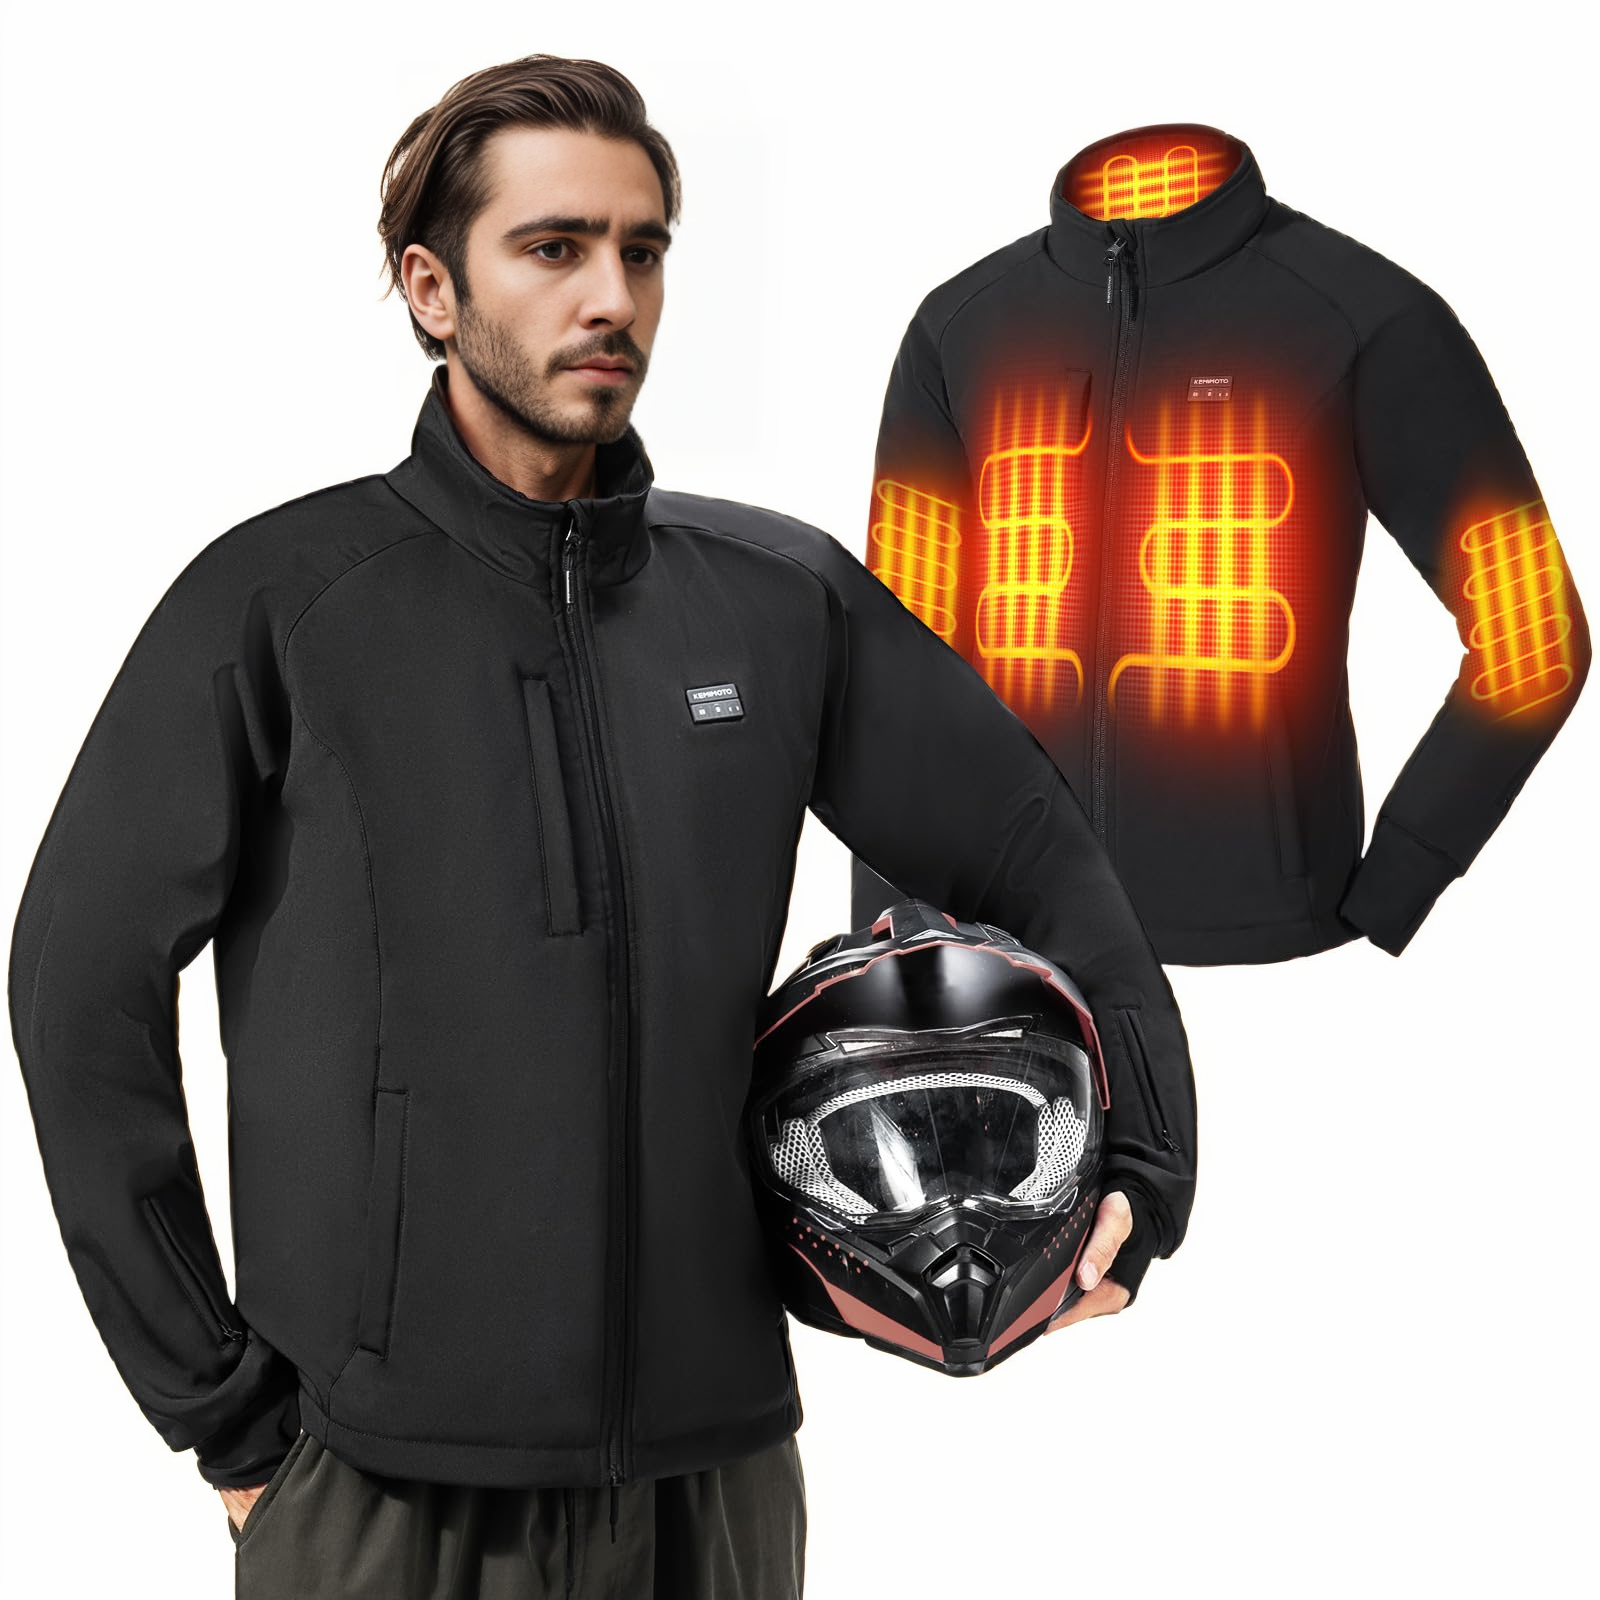 12V Heated Jacket for Motorcycle Riding